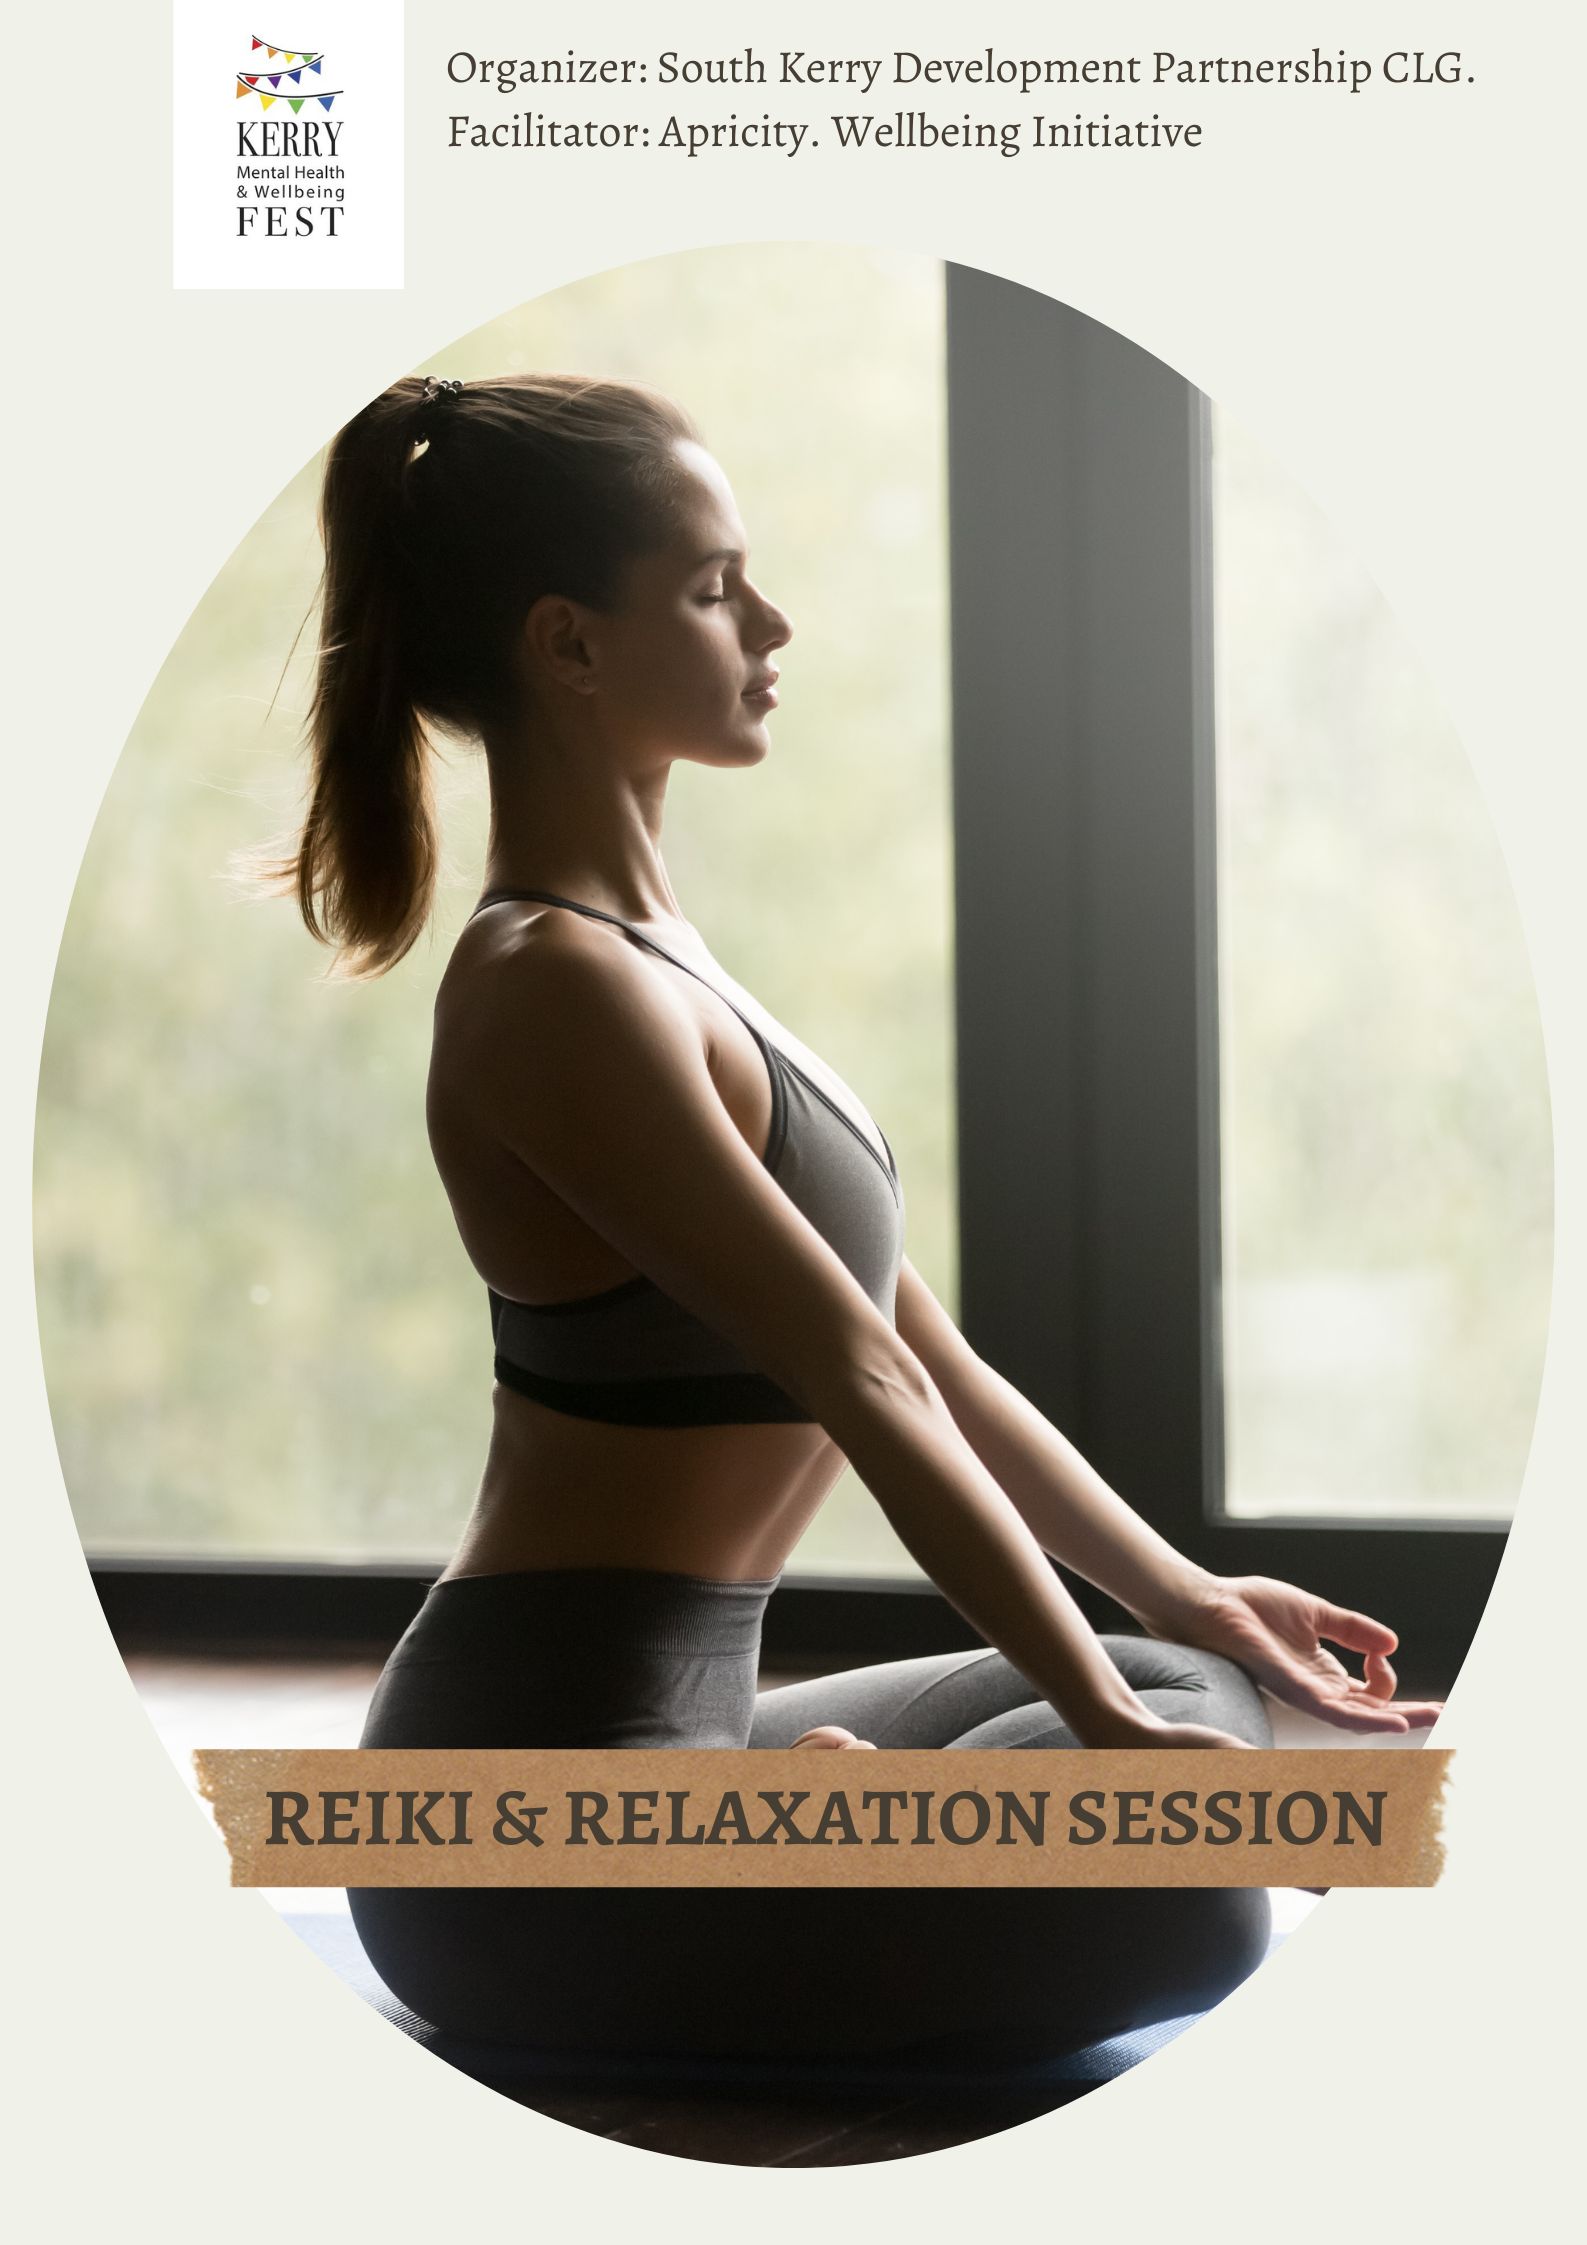 Reiki & Relaxation Session event at Kerry Mental Health & Wellbeing Fest 2023